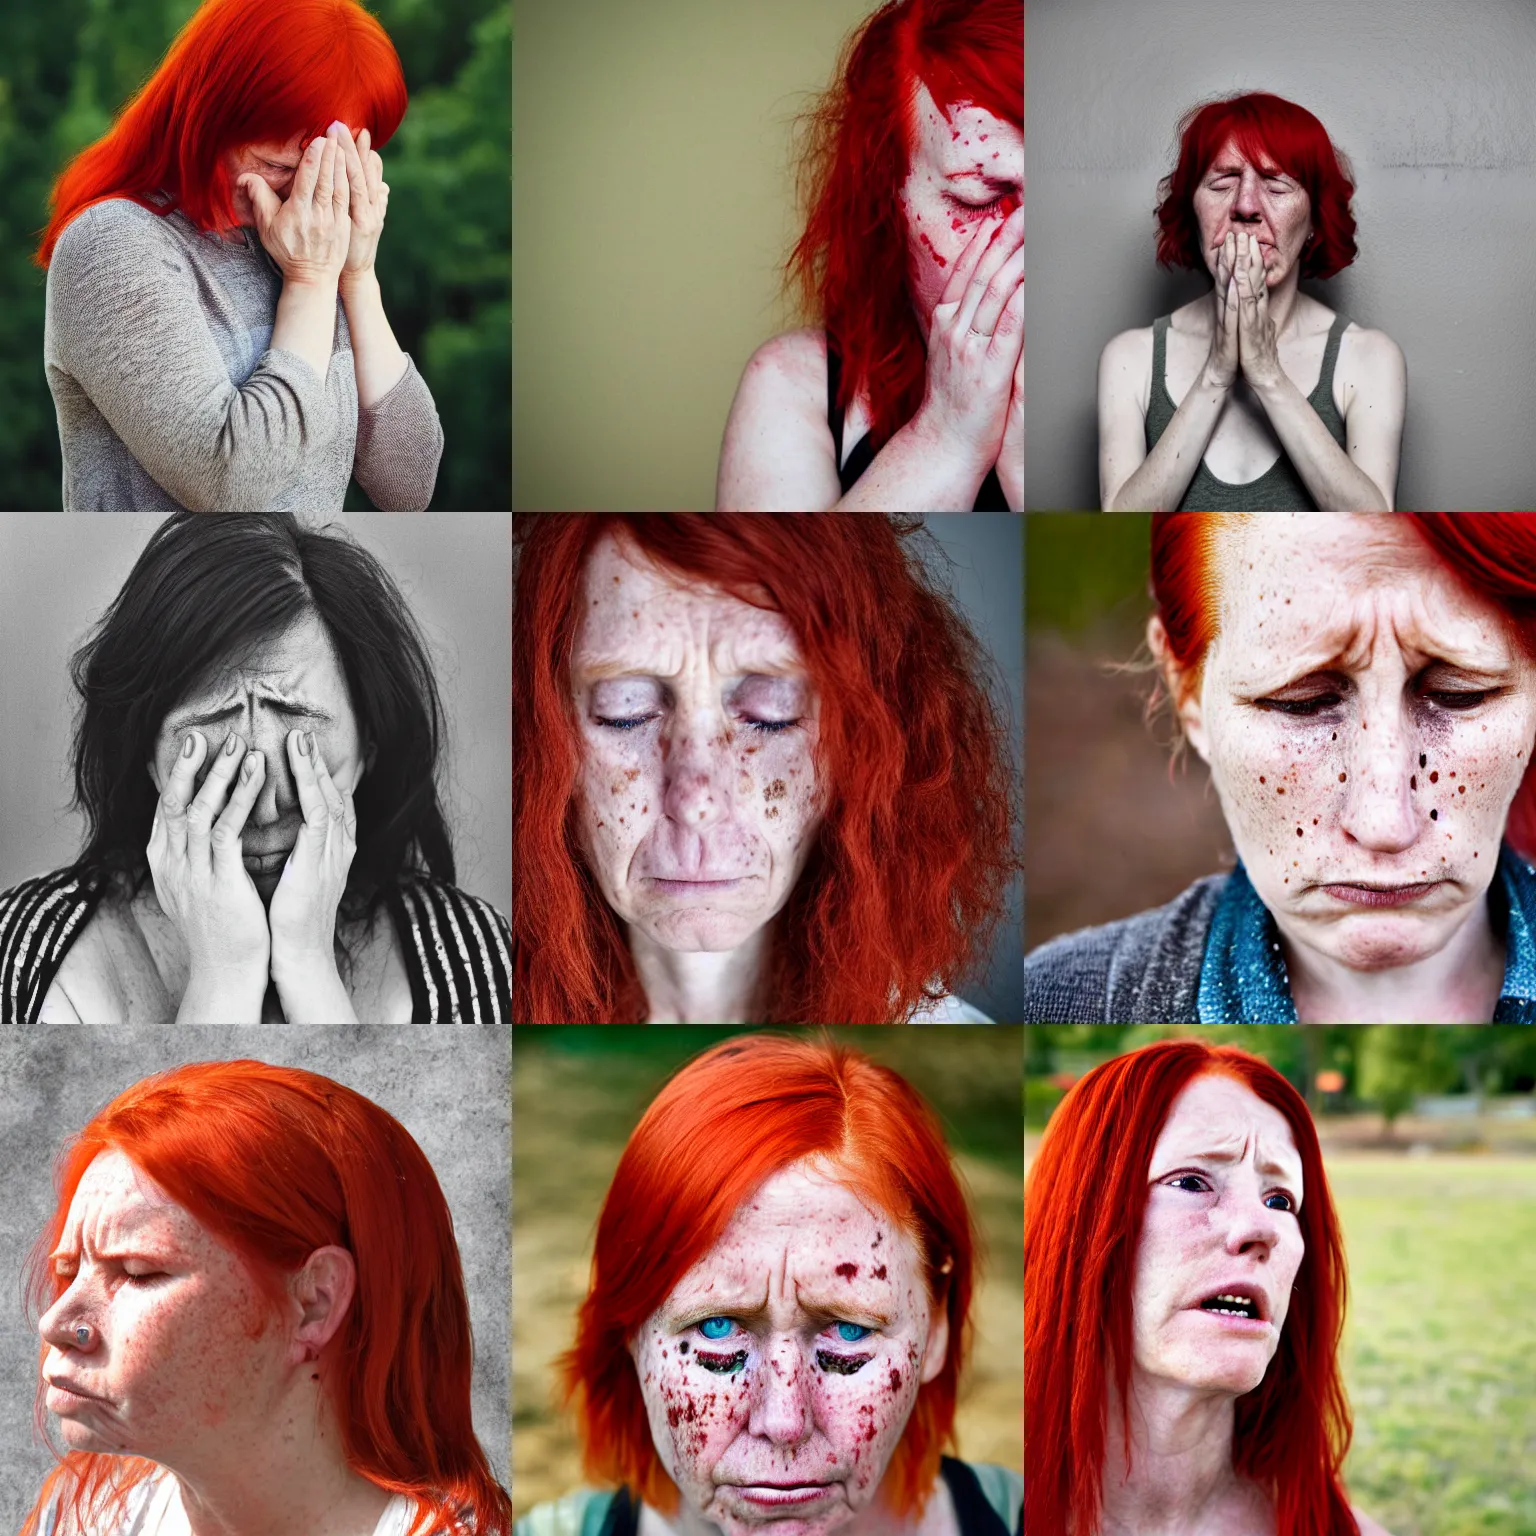 Prompt: a photograph of a crying thirty year old woman standing alone, red hair, freckles, tears